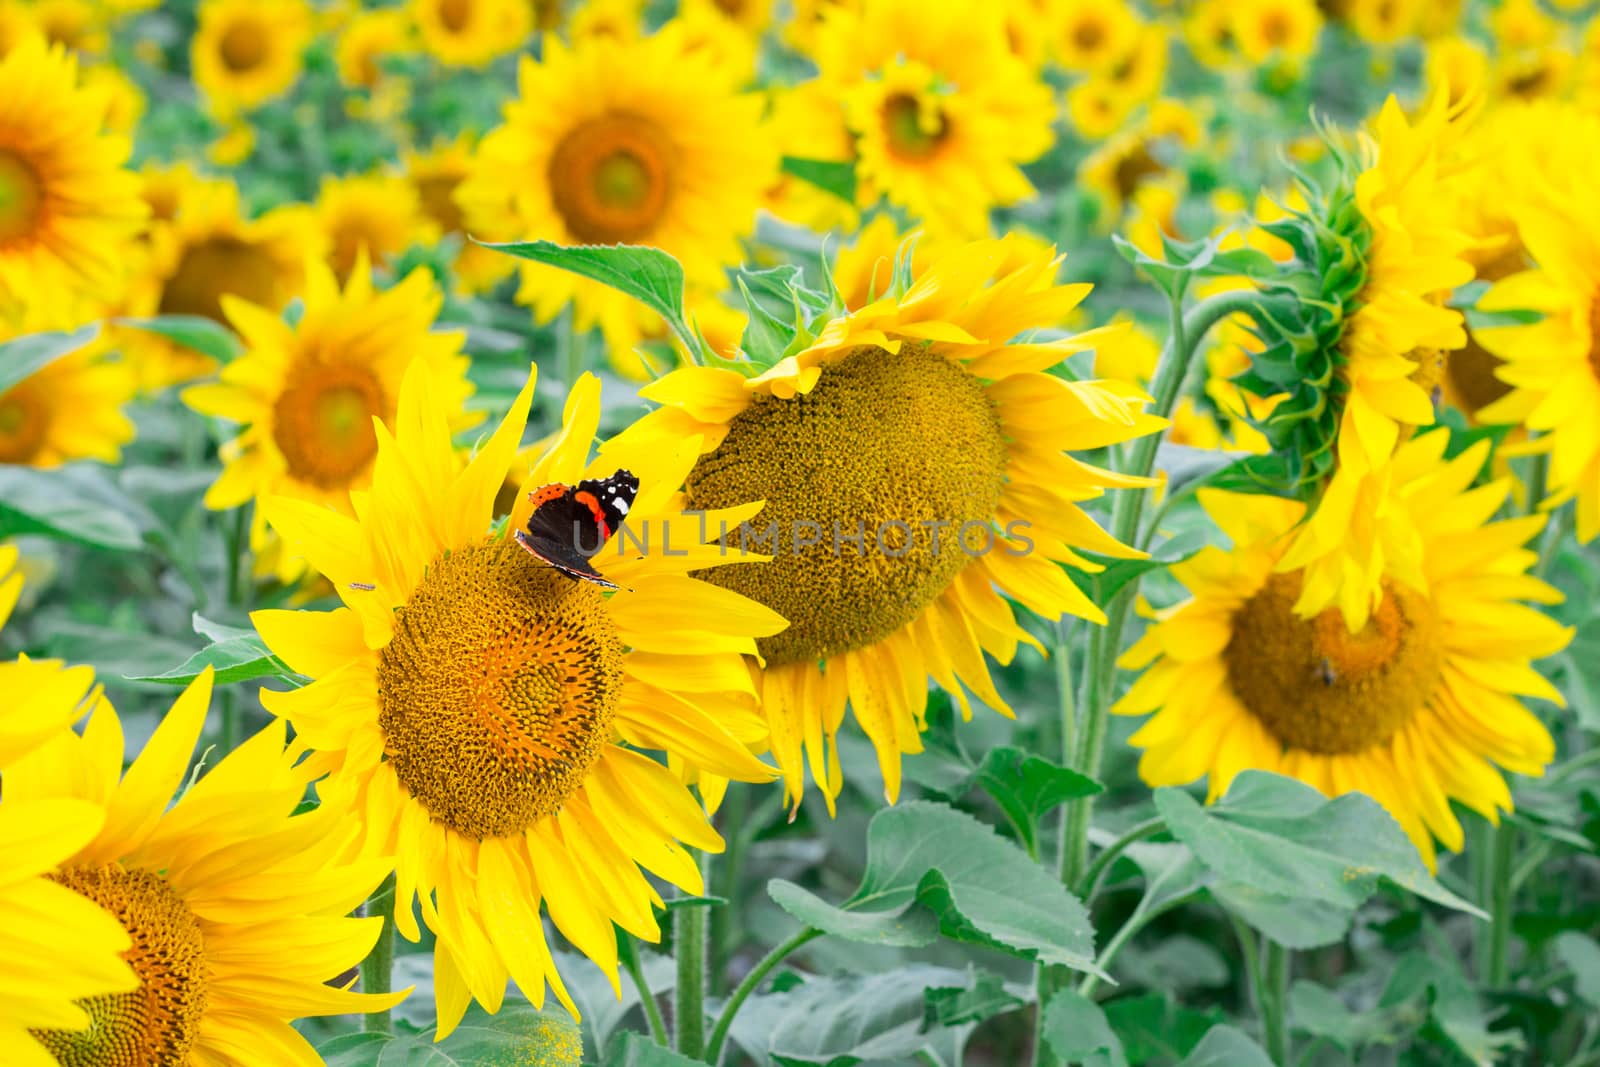 Red black butterfly flying on yellow bright sunflowers on field